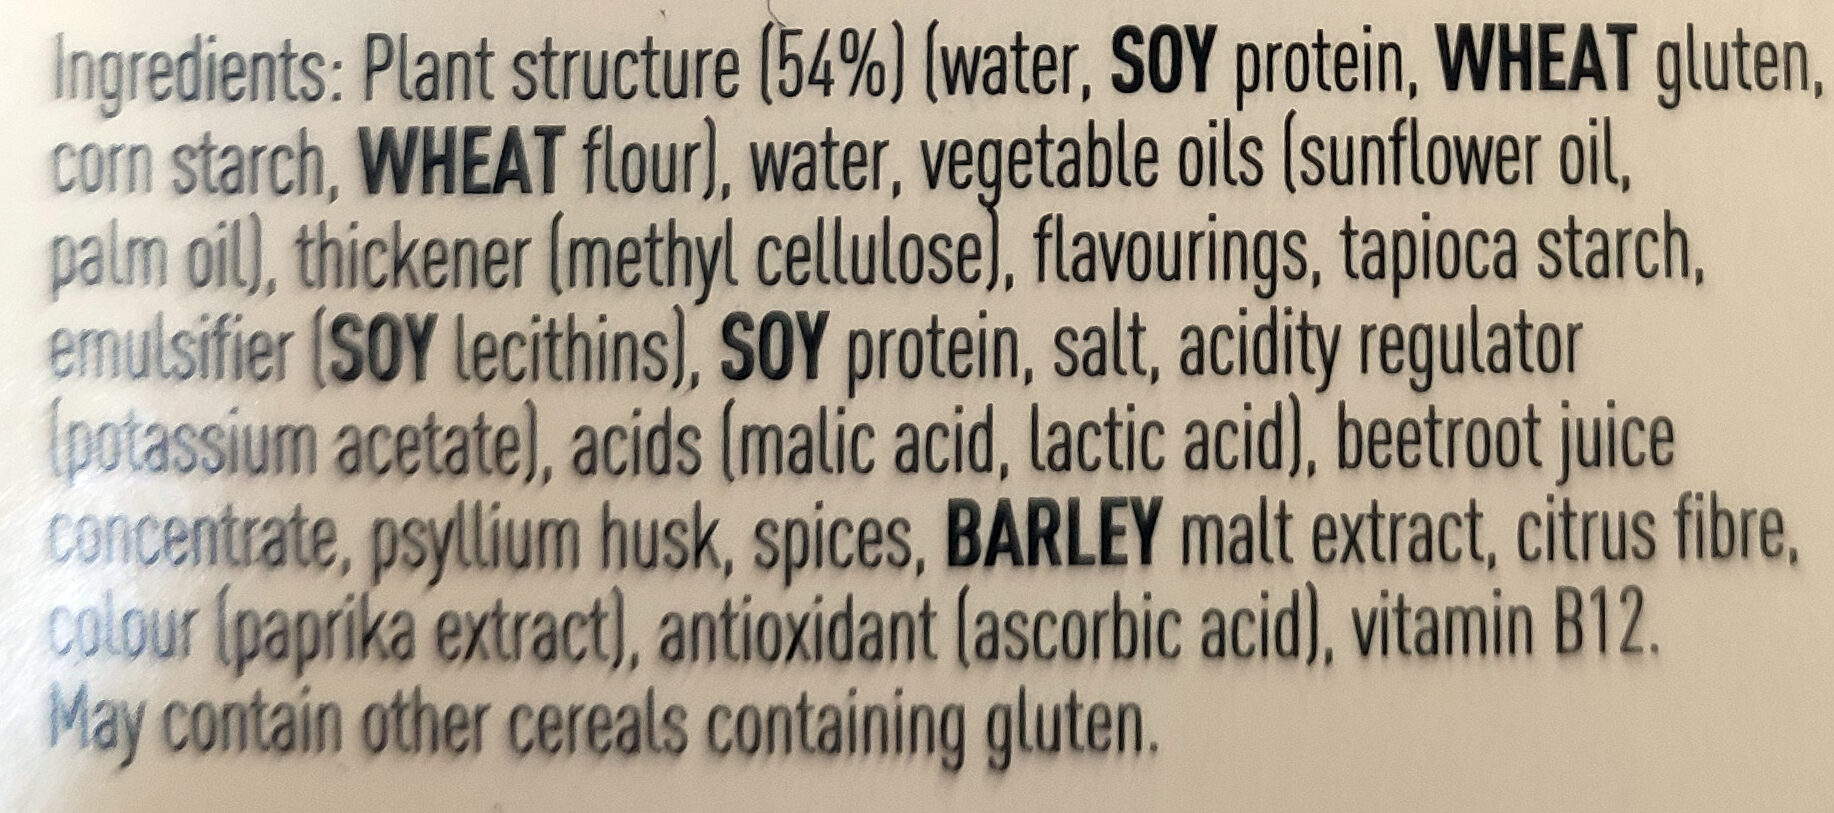 Patty on the back - Ingredients